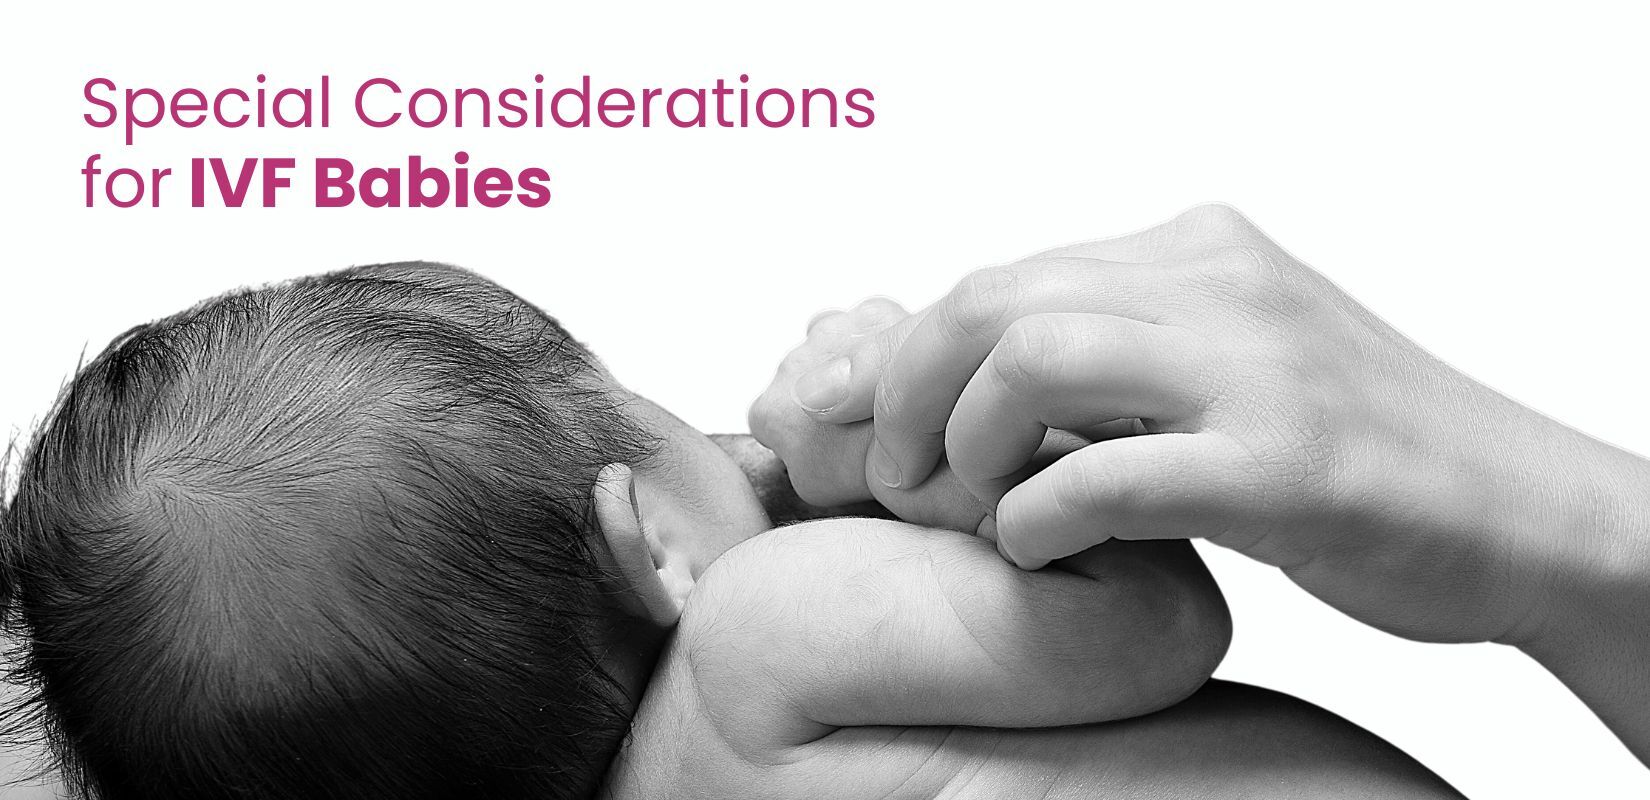 Special Considerations for IVF Babies